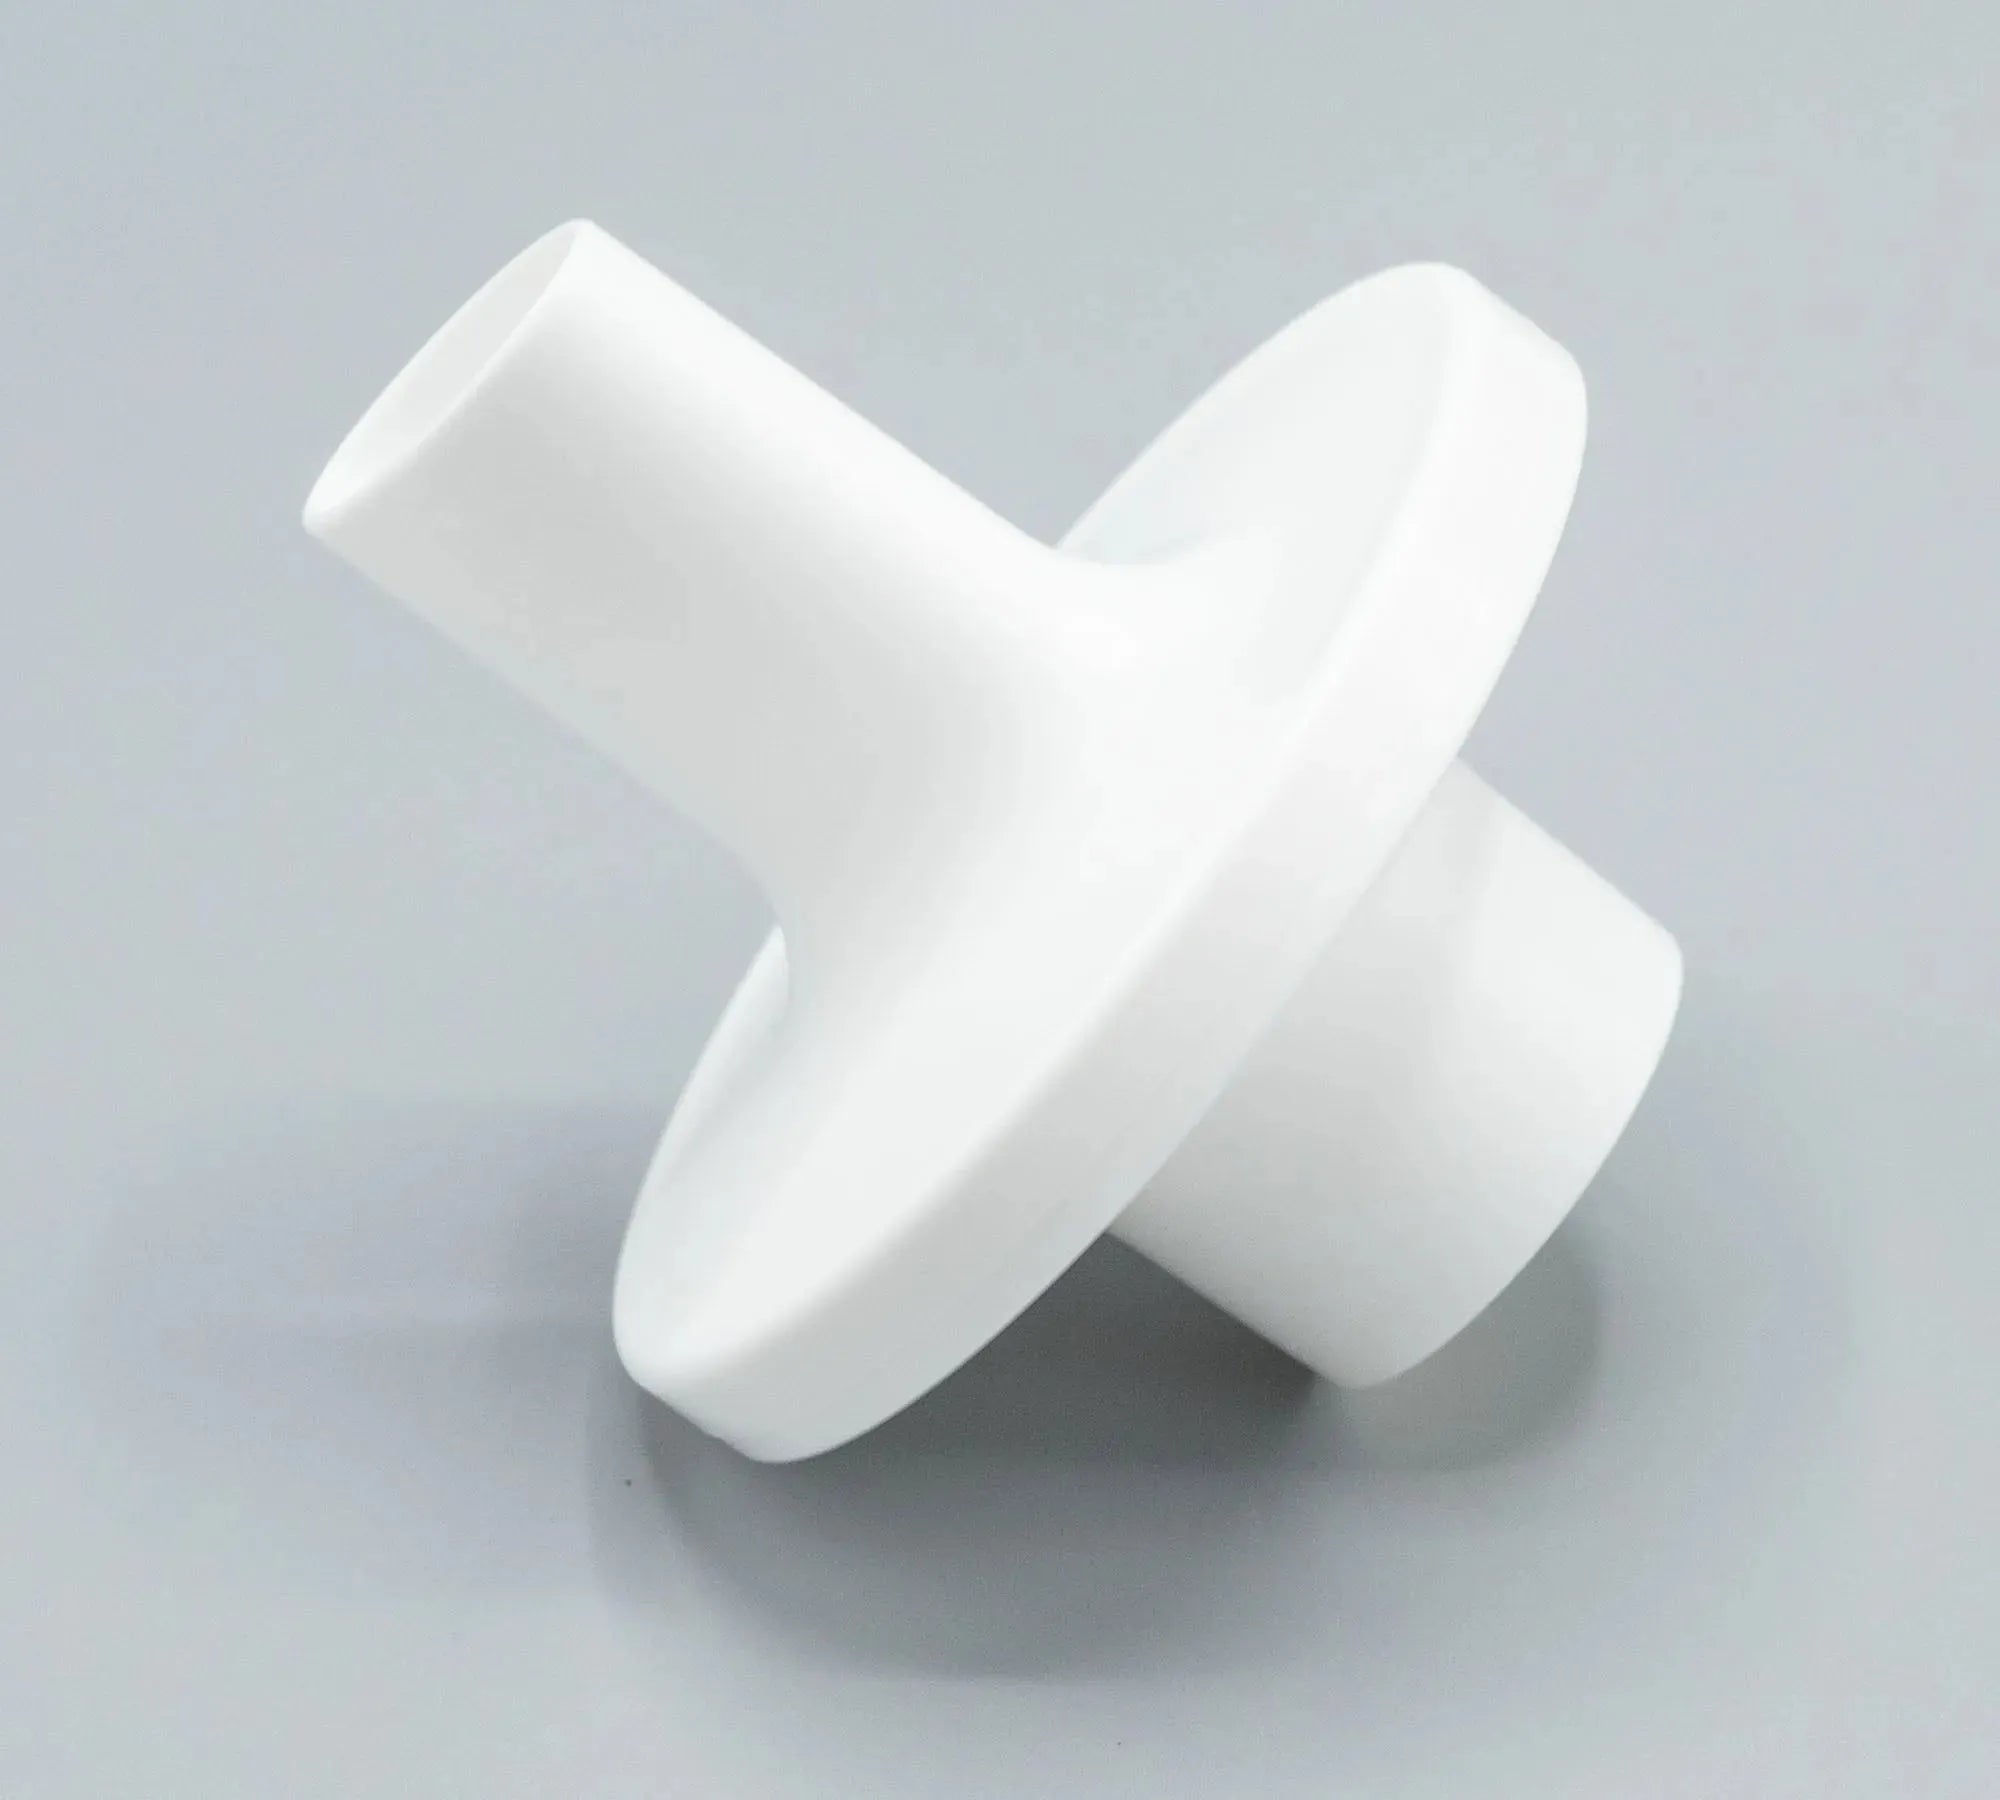 The PFT Elliptical Filter mouthpiece is elliptical in shape and white in color.